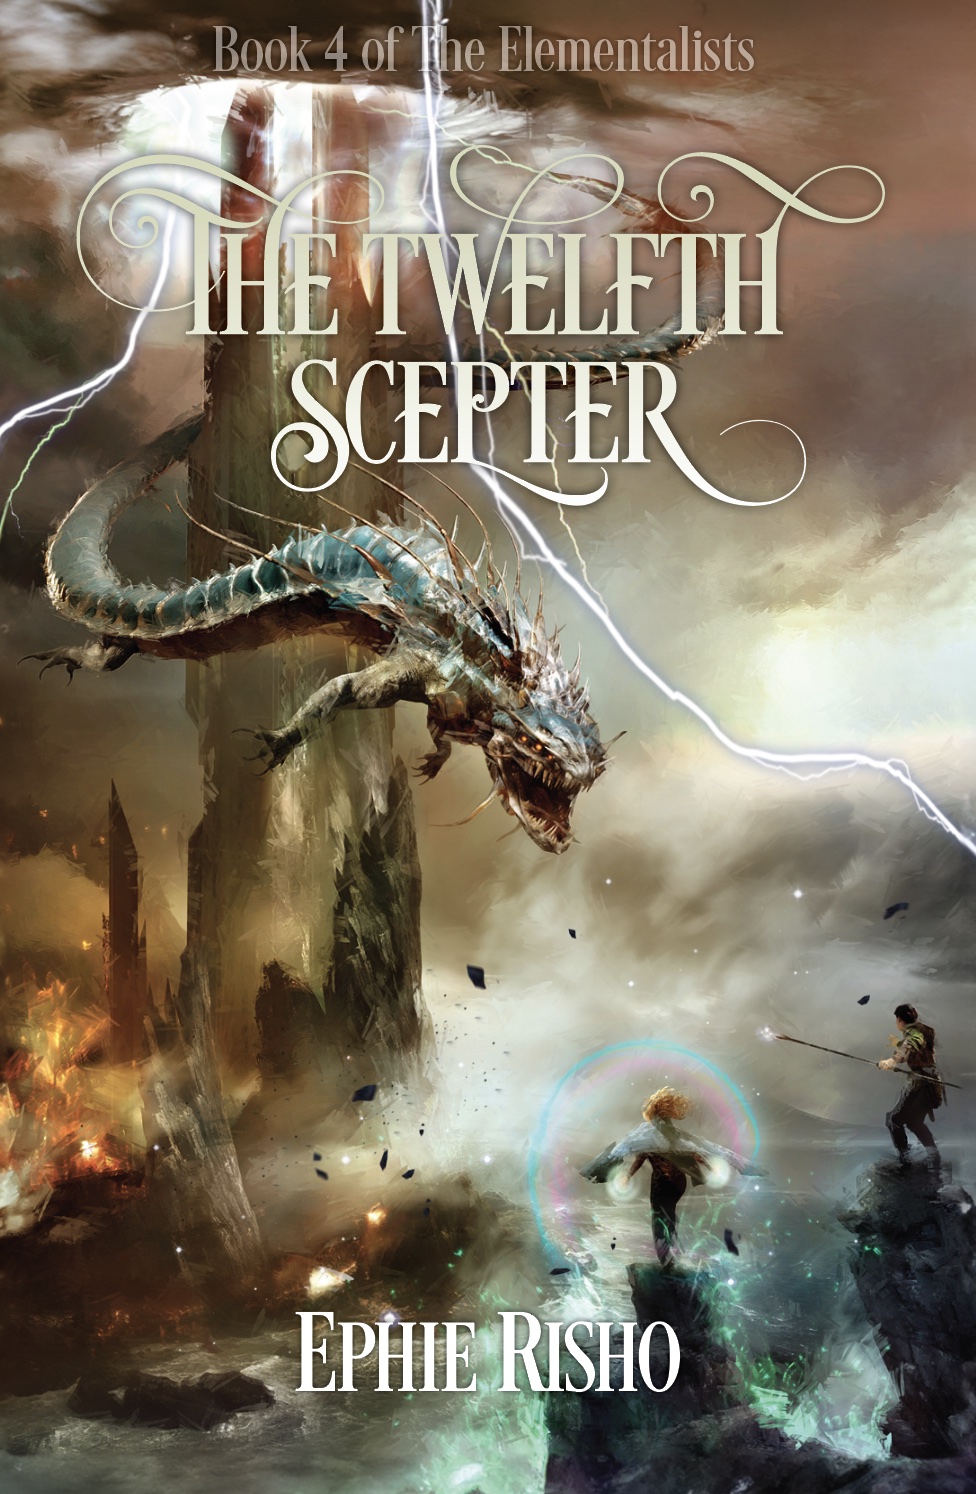 The-Twelfth-Scepter-Cover